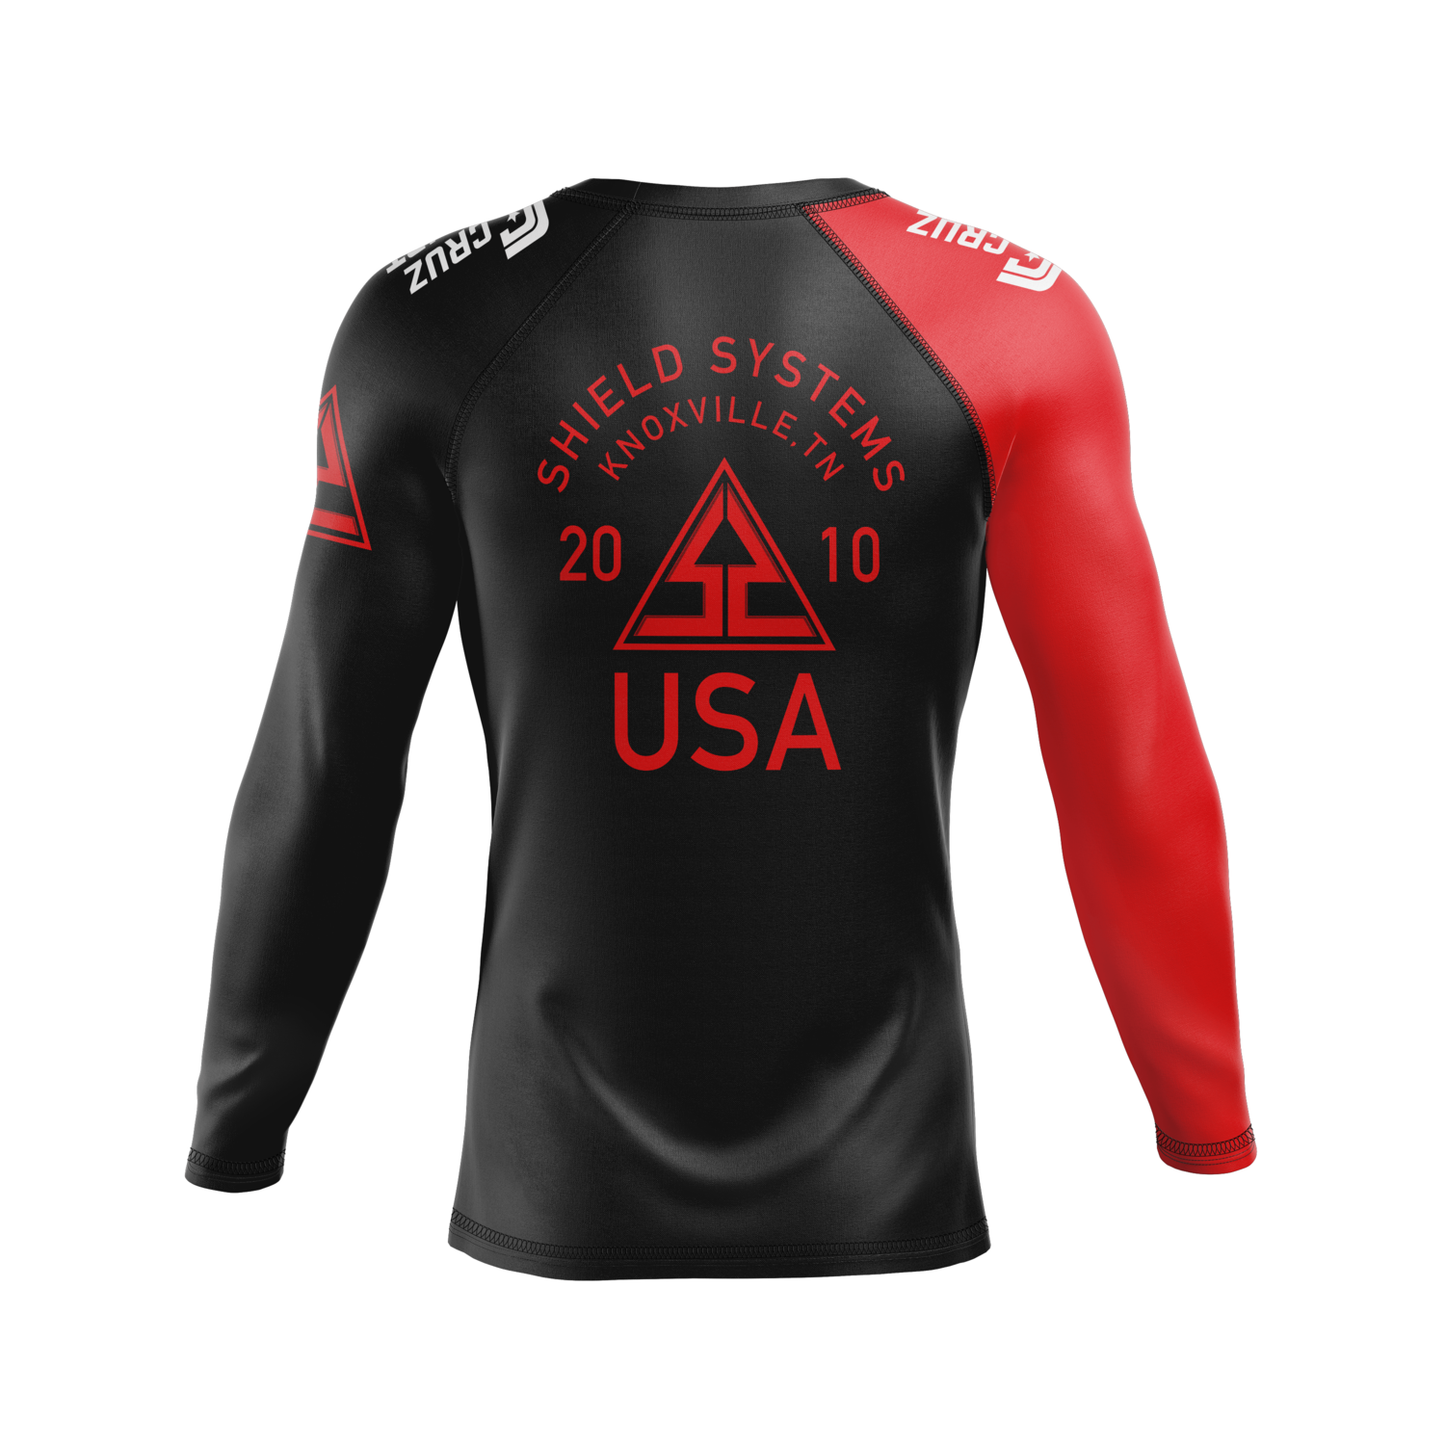 Shield Systems women's rash guard Badge Ranked, red